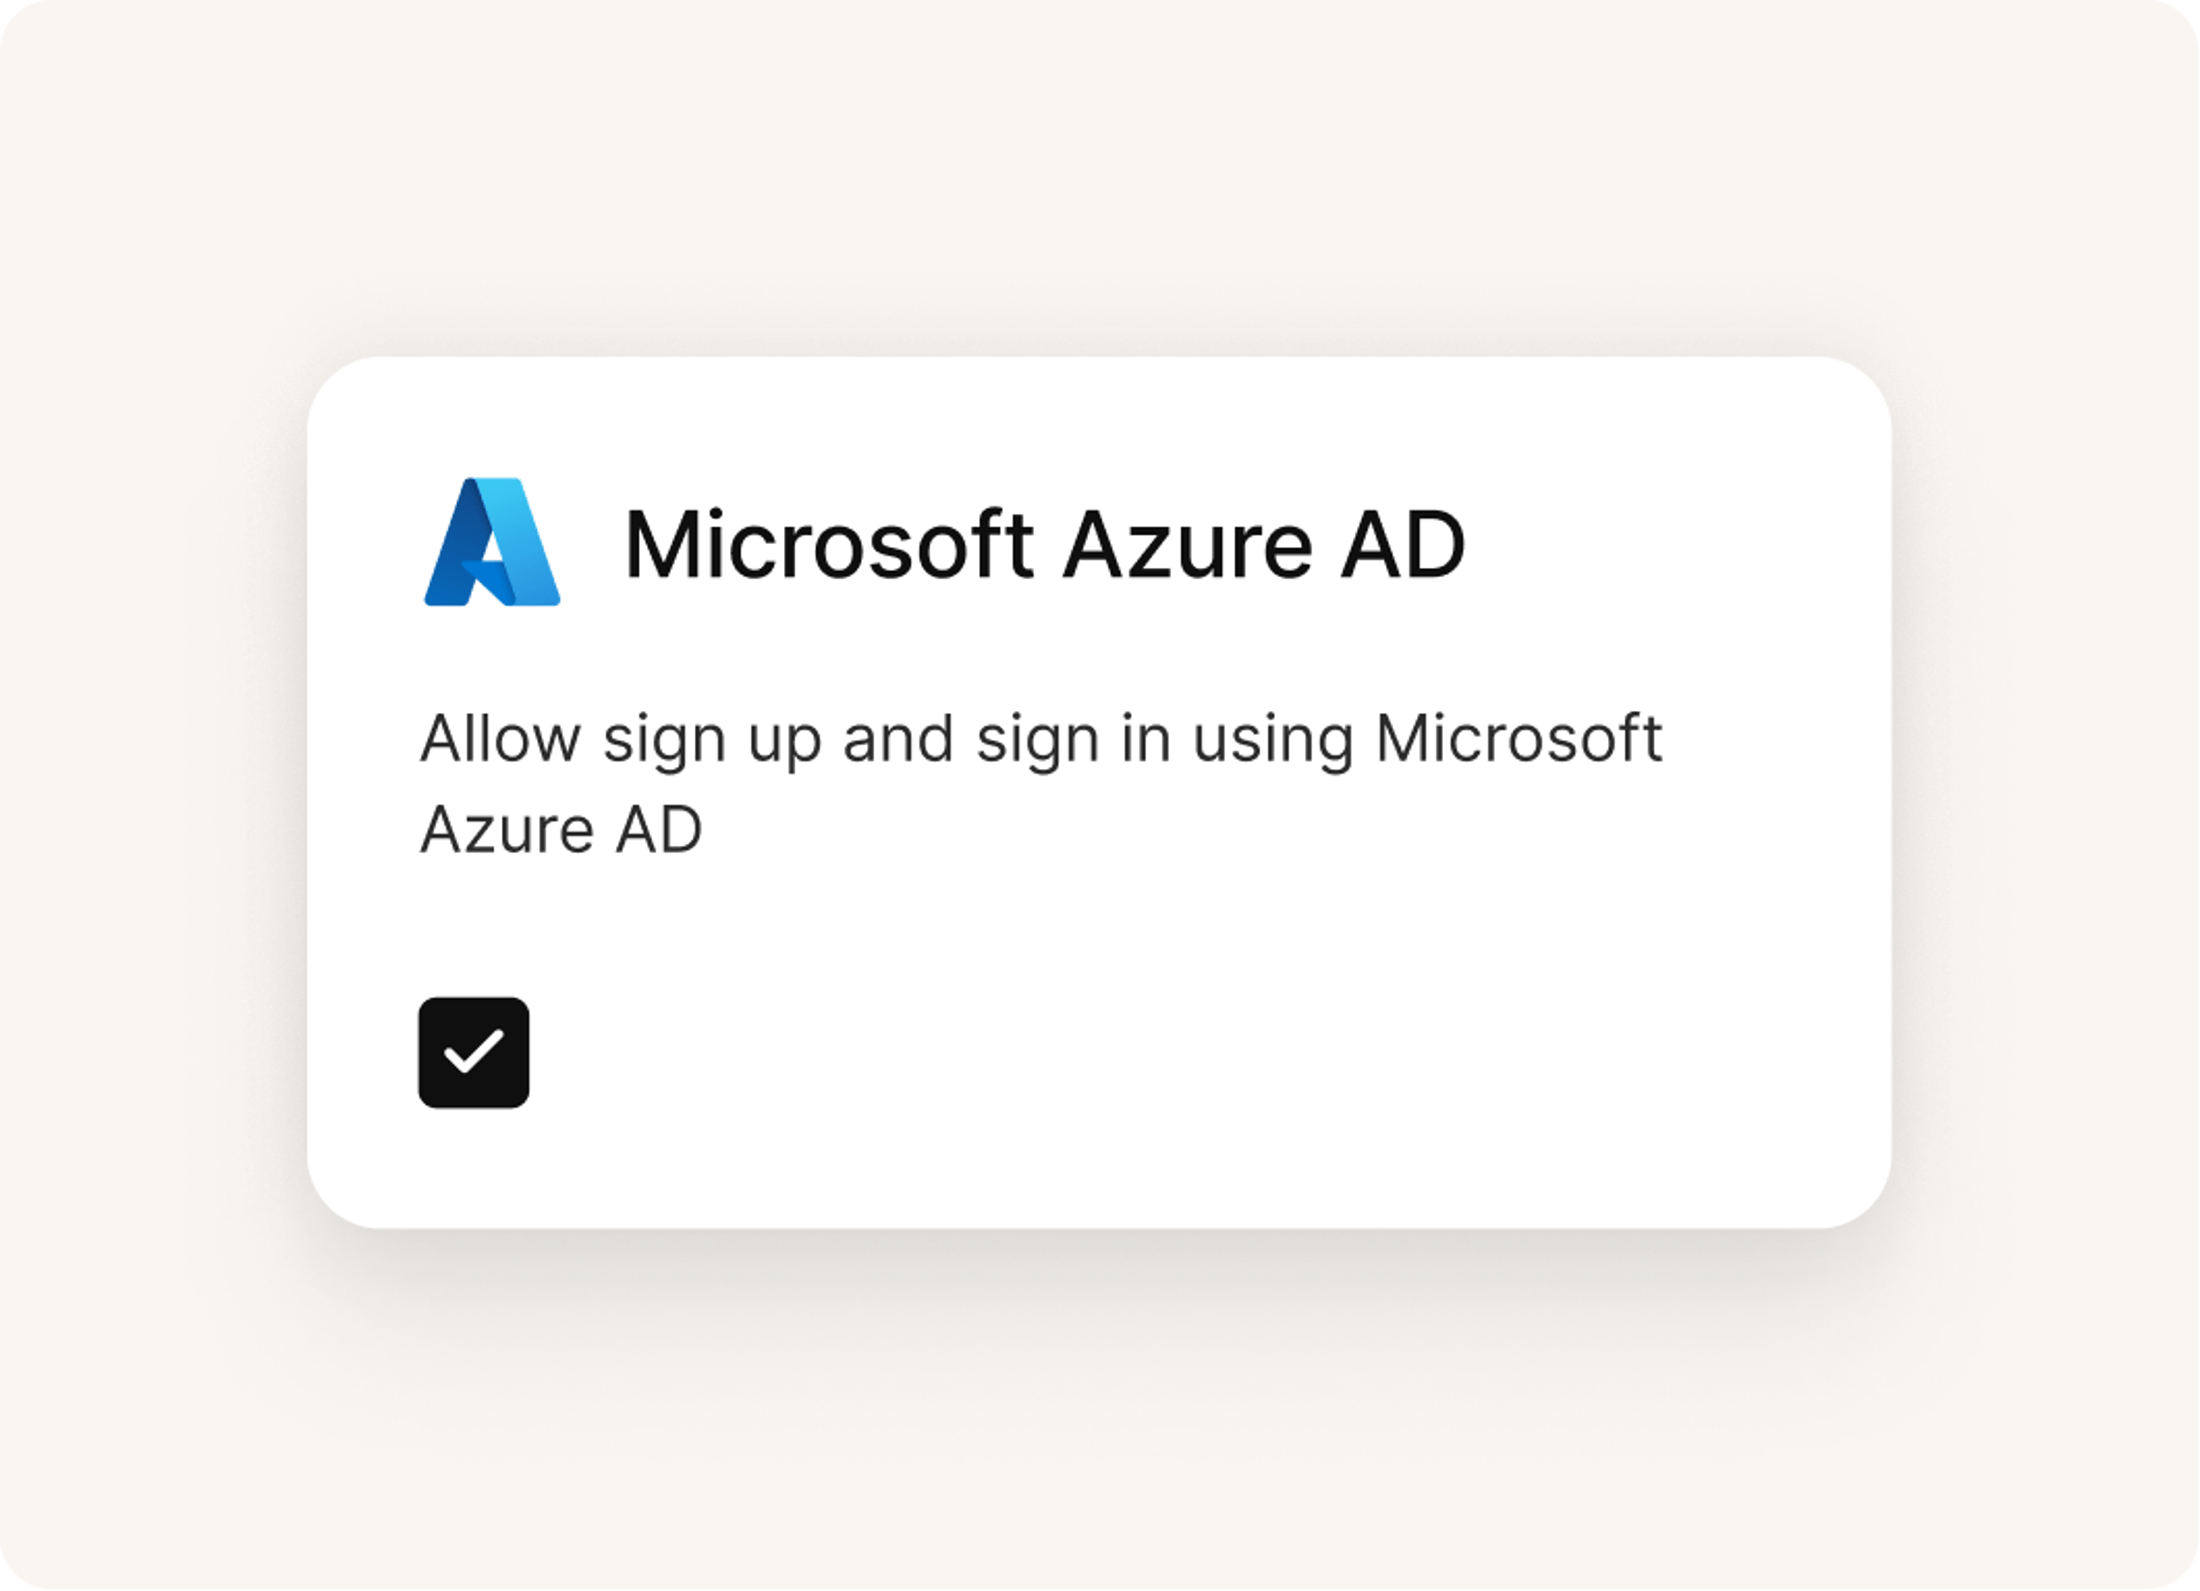 User interfacing showing Microsoft Azure AD being activated